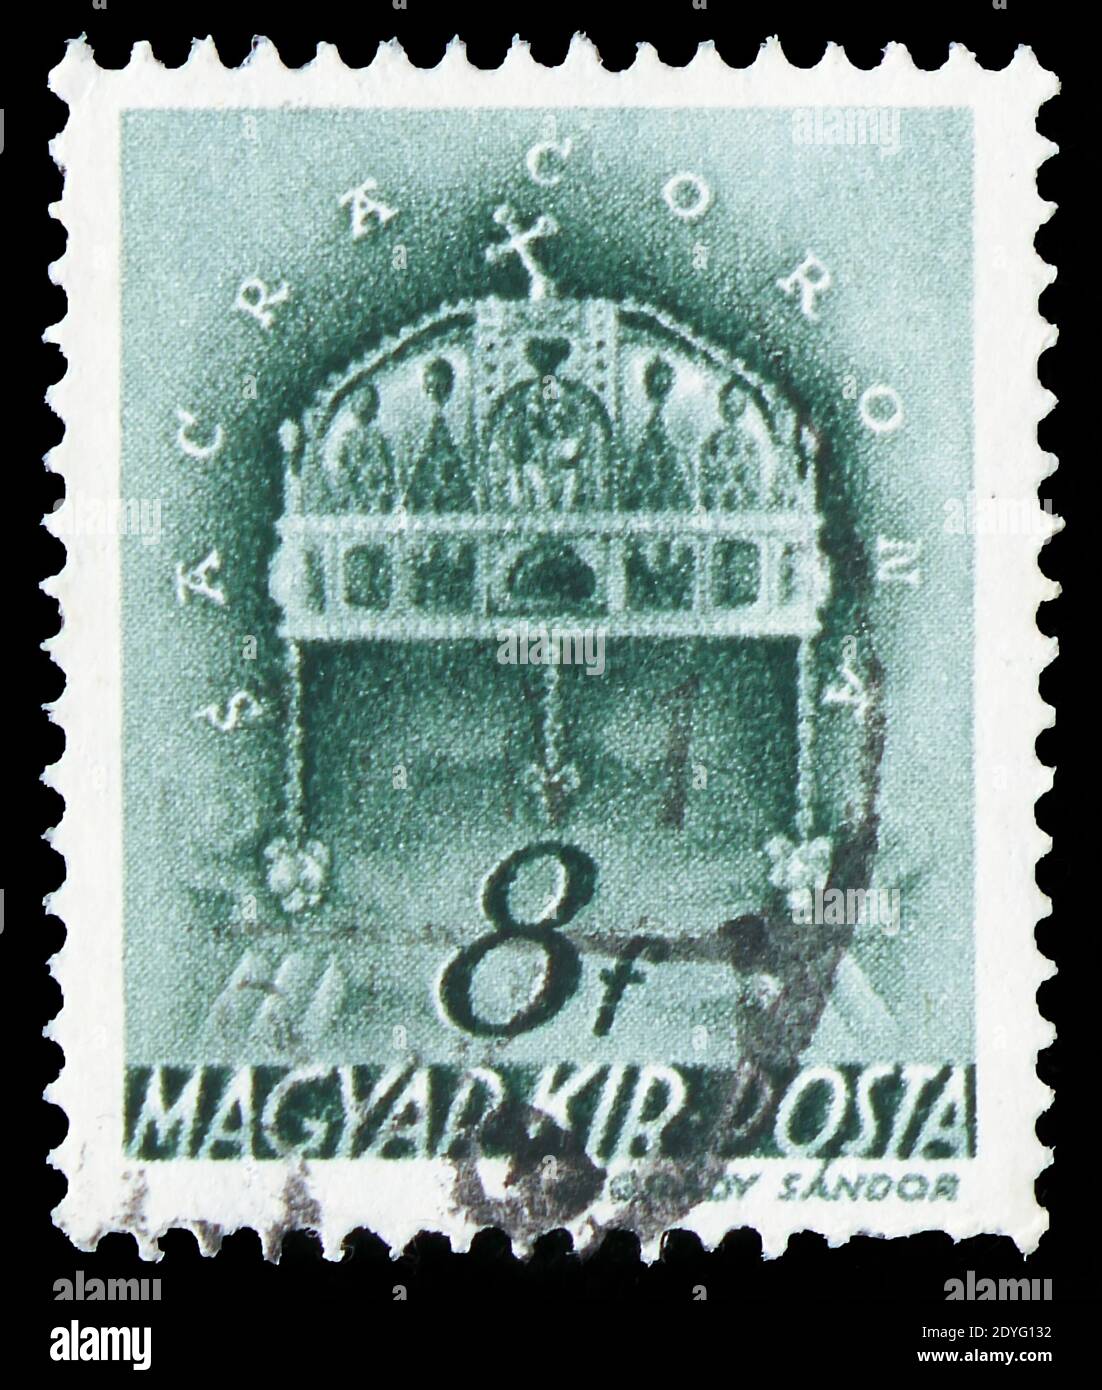 MOSCOW, RUSSIA - JULY 19, 2019: Postage stamp printed in Hungary shows Crown of Saint Stephen, Church in Hungary serie, circa 1941 Stock Photo